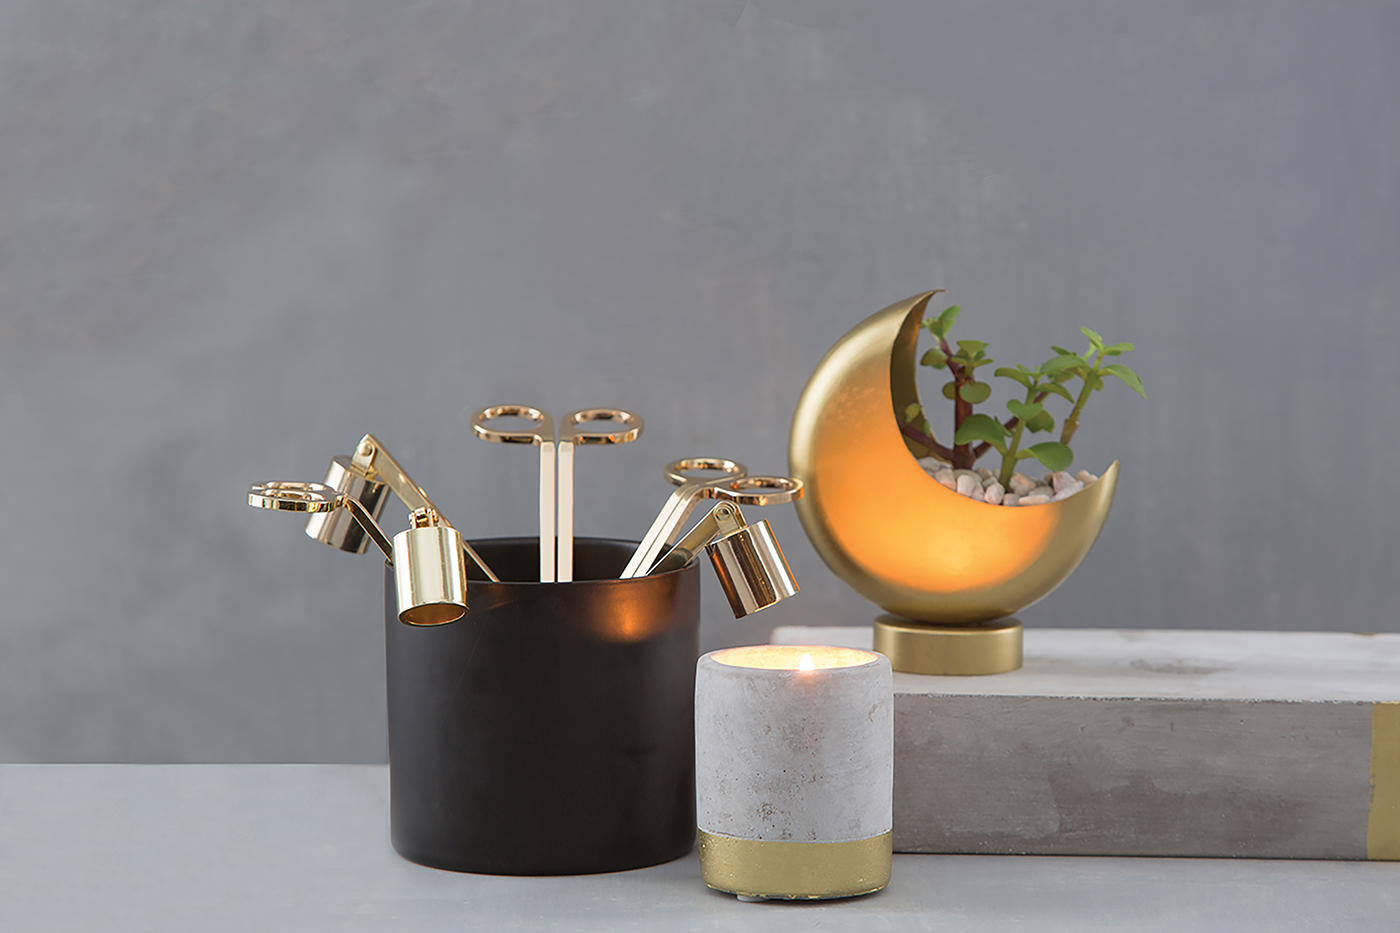 Brown vase holding three Golden Candle Snuffers by Designworks and set on desk by candle and moon planter.